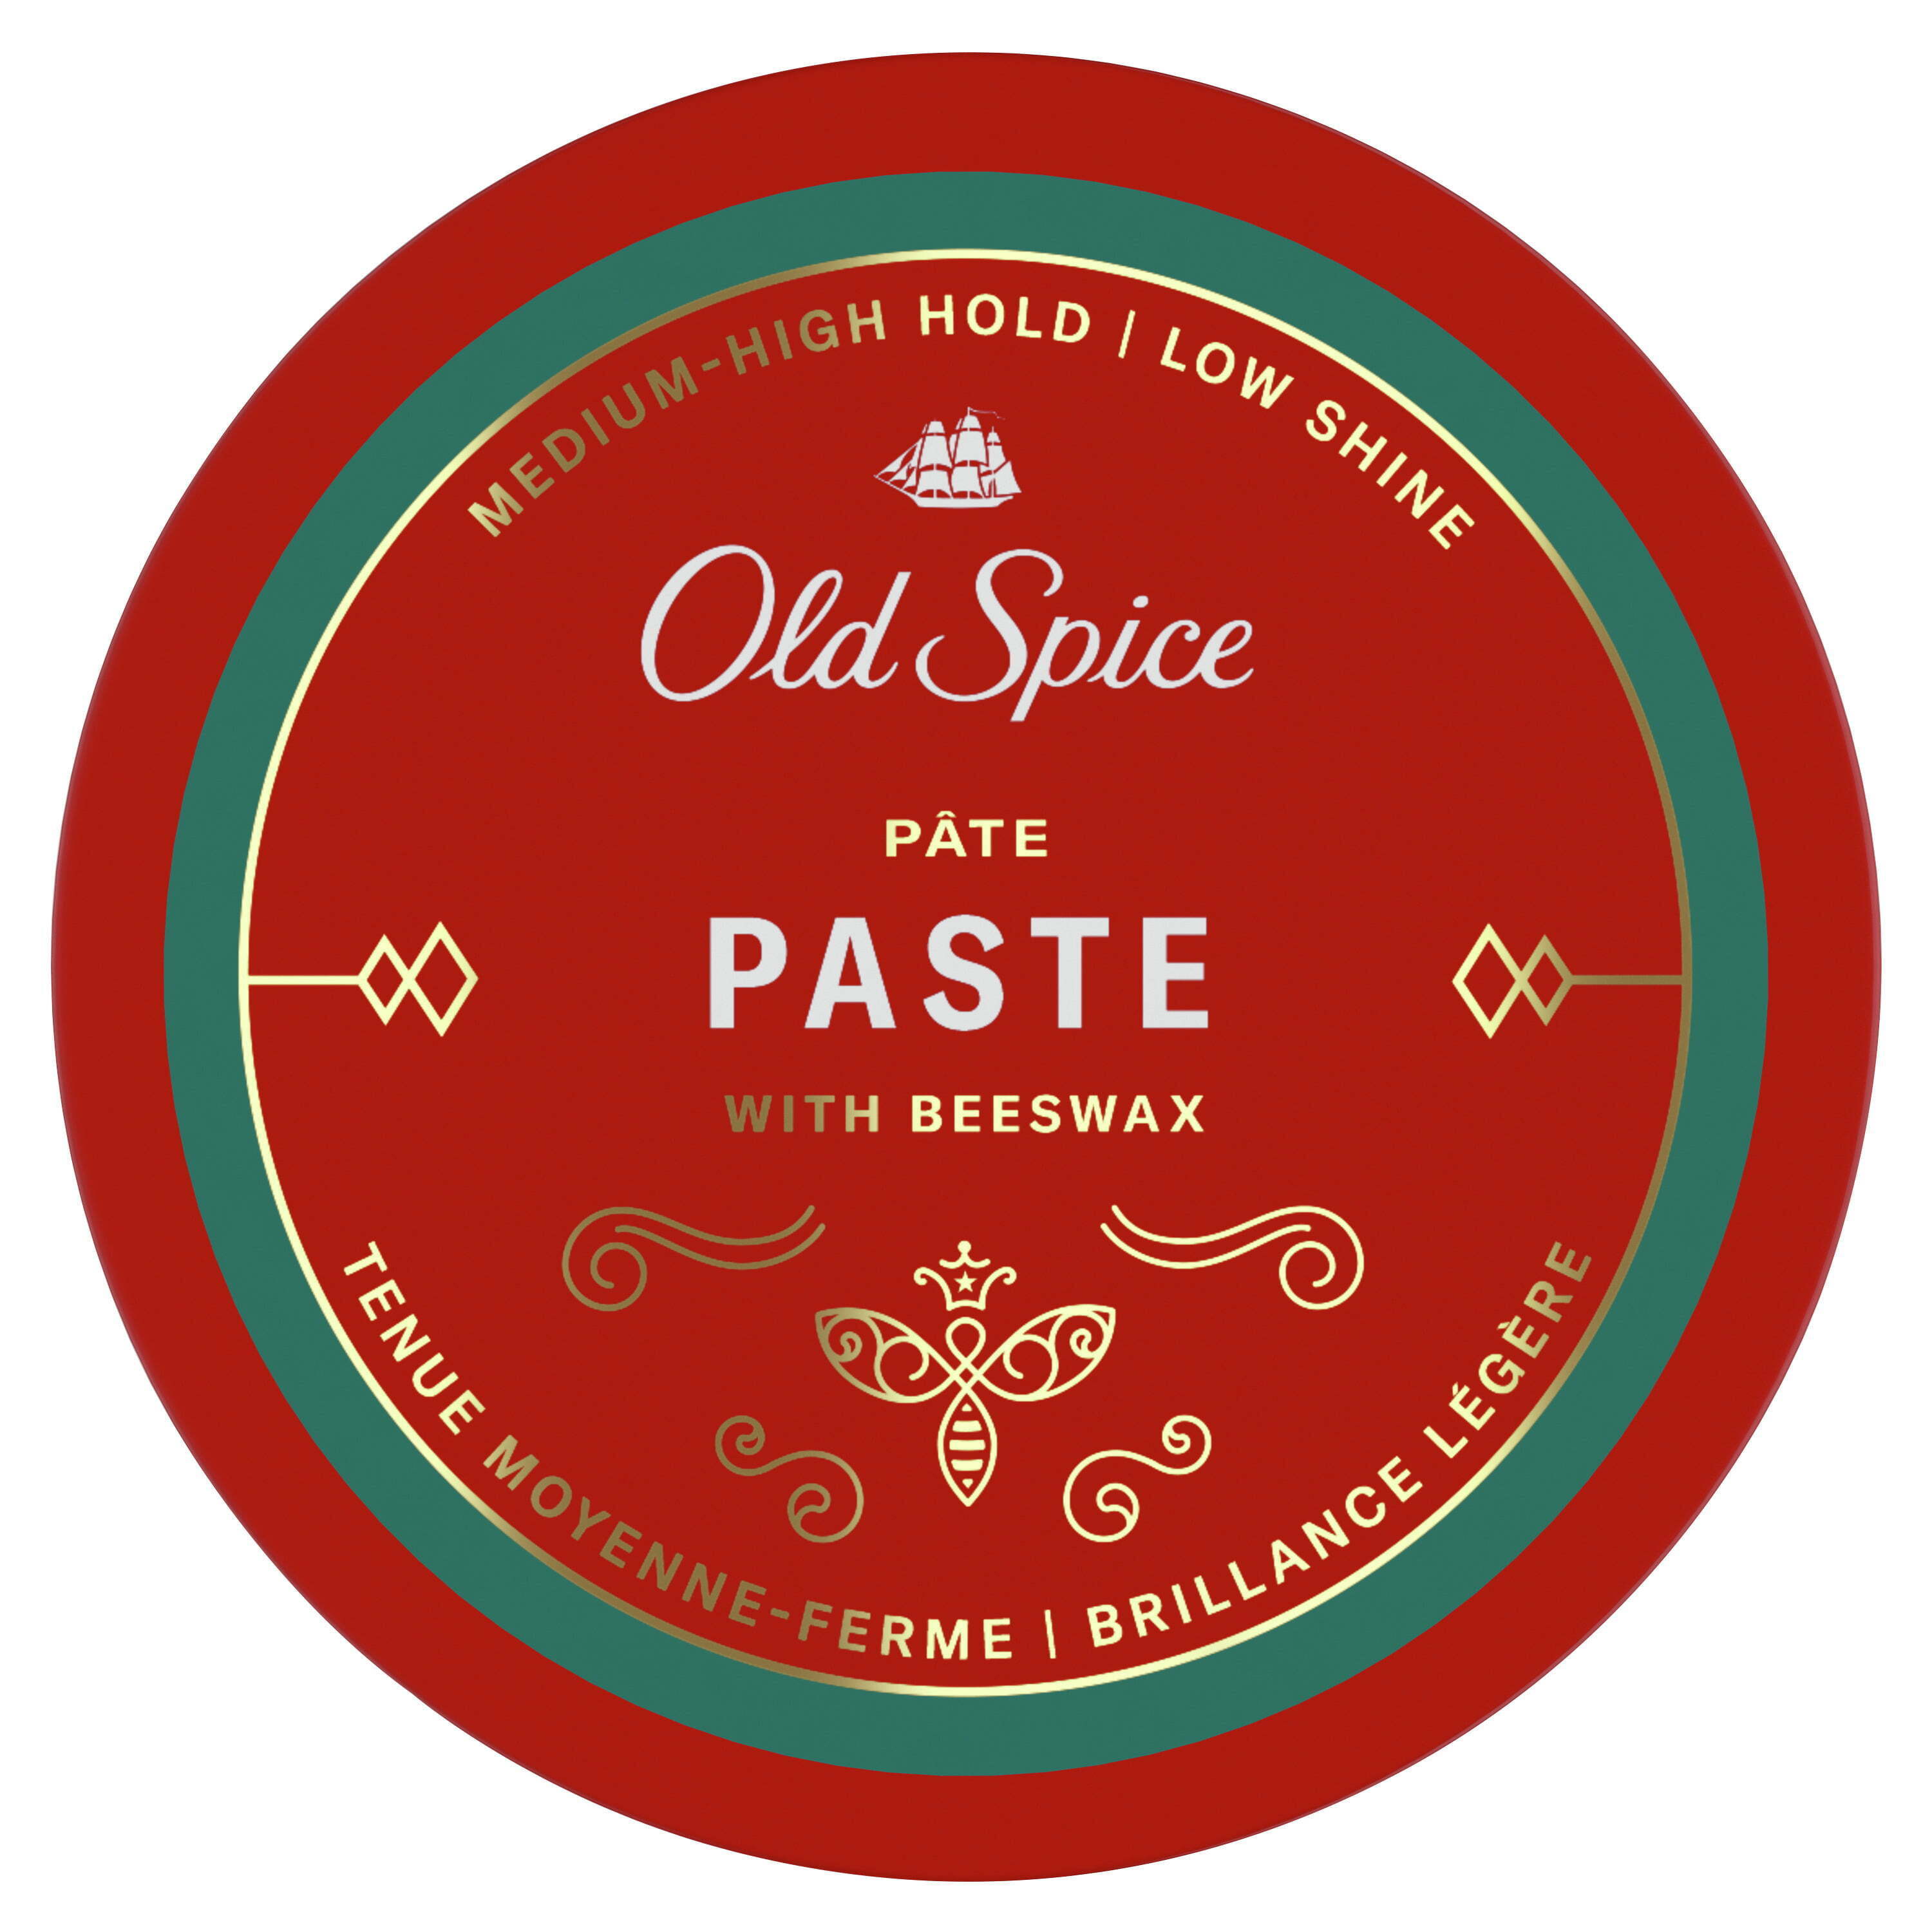 Old Spice Hair Styling Texturizing Paste for Men, Medium to High Hold, 2.22 oz - image 1 of 9